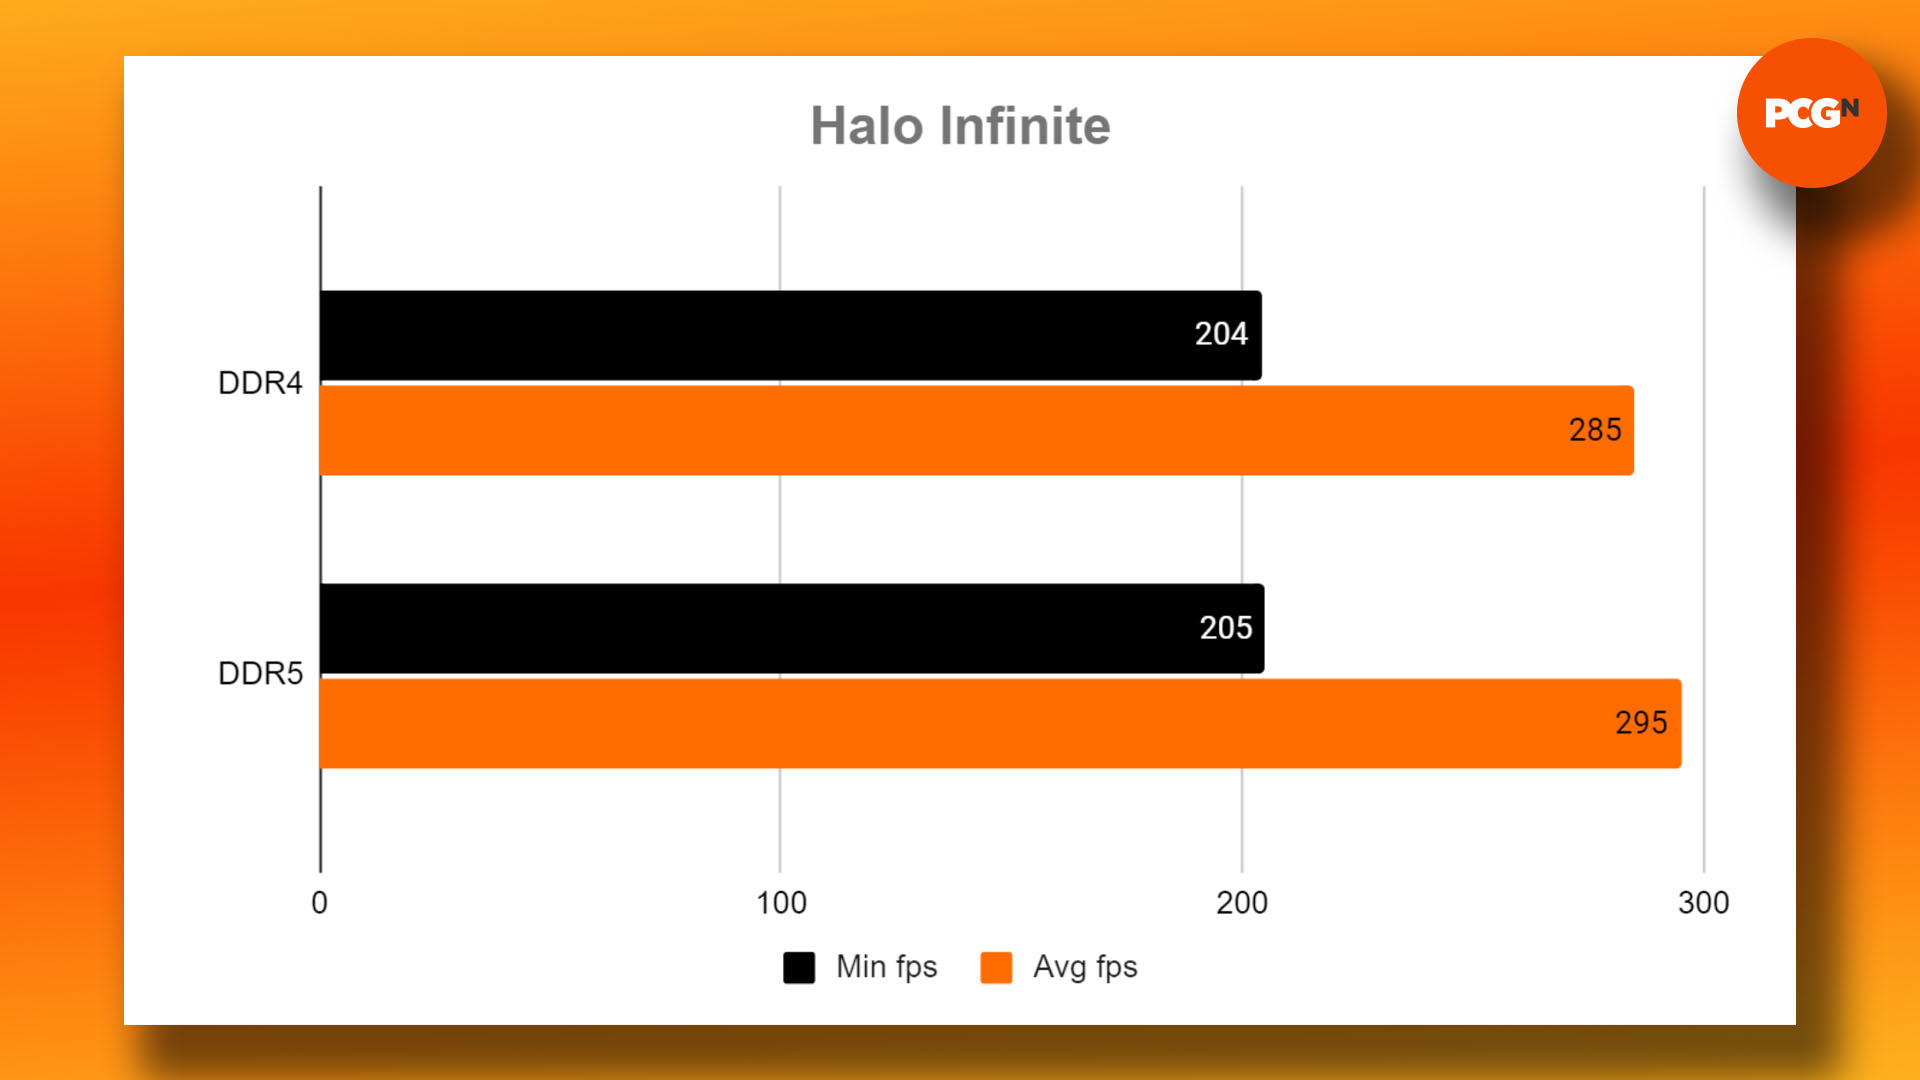 DDR4 vs DDR5 - which RAM to buy for gaming: Halo Infinite benchmark results graph